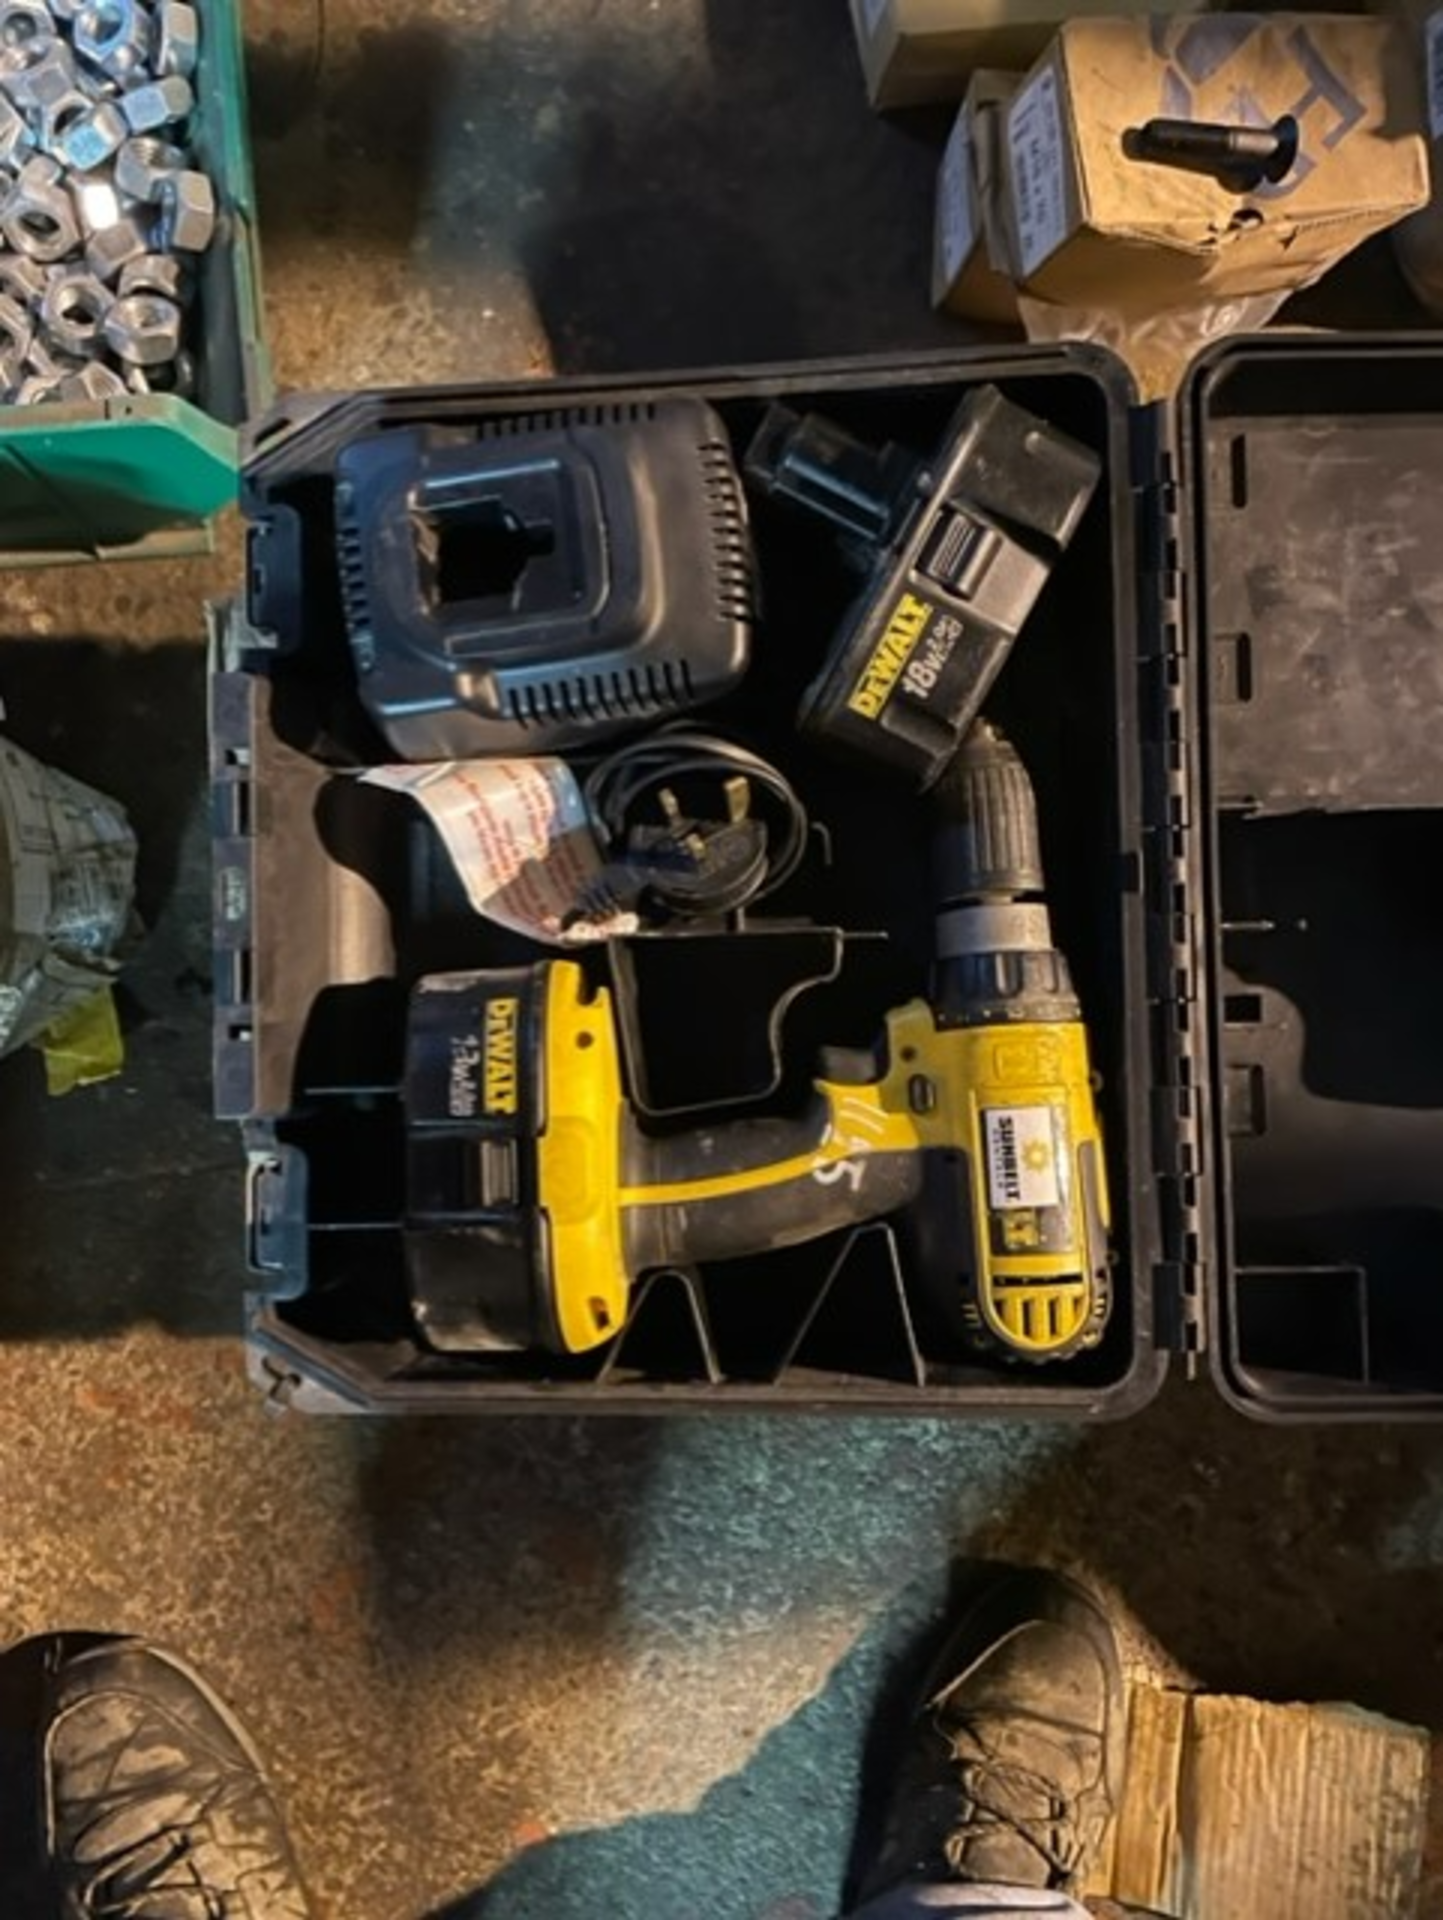 Dewalt drill complete with 2 batteries and charger works see attached video